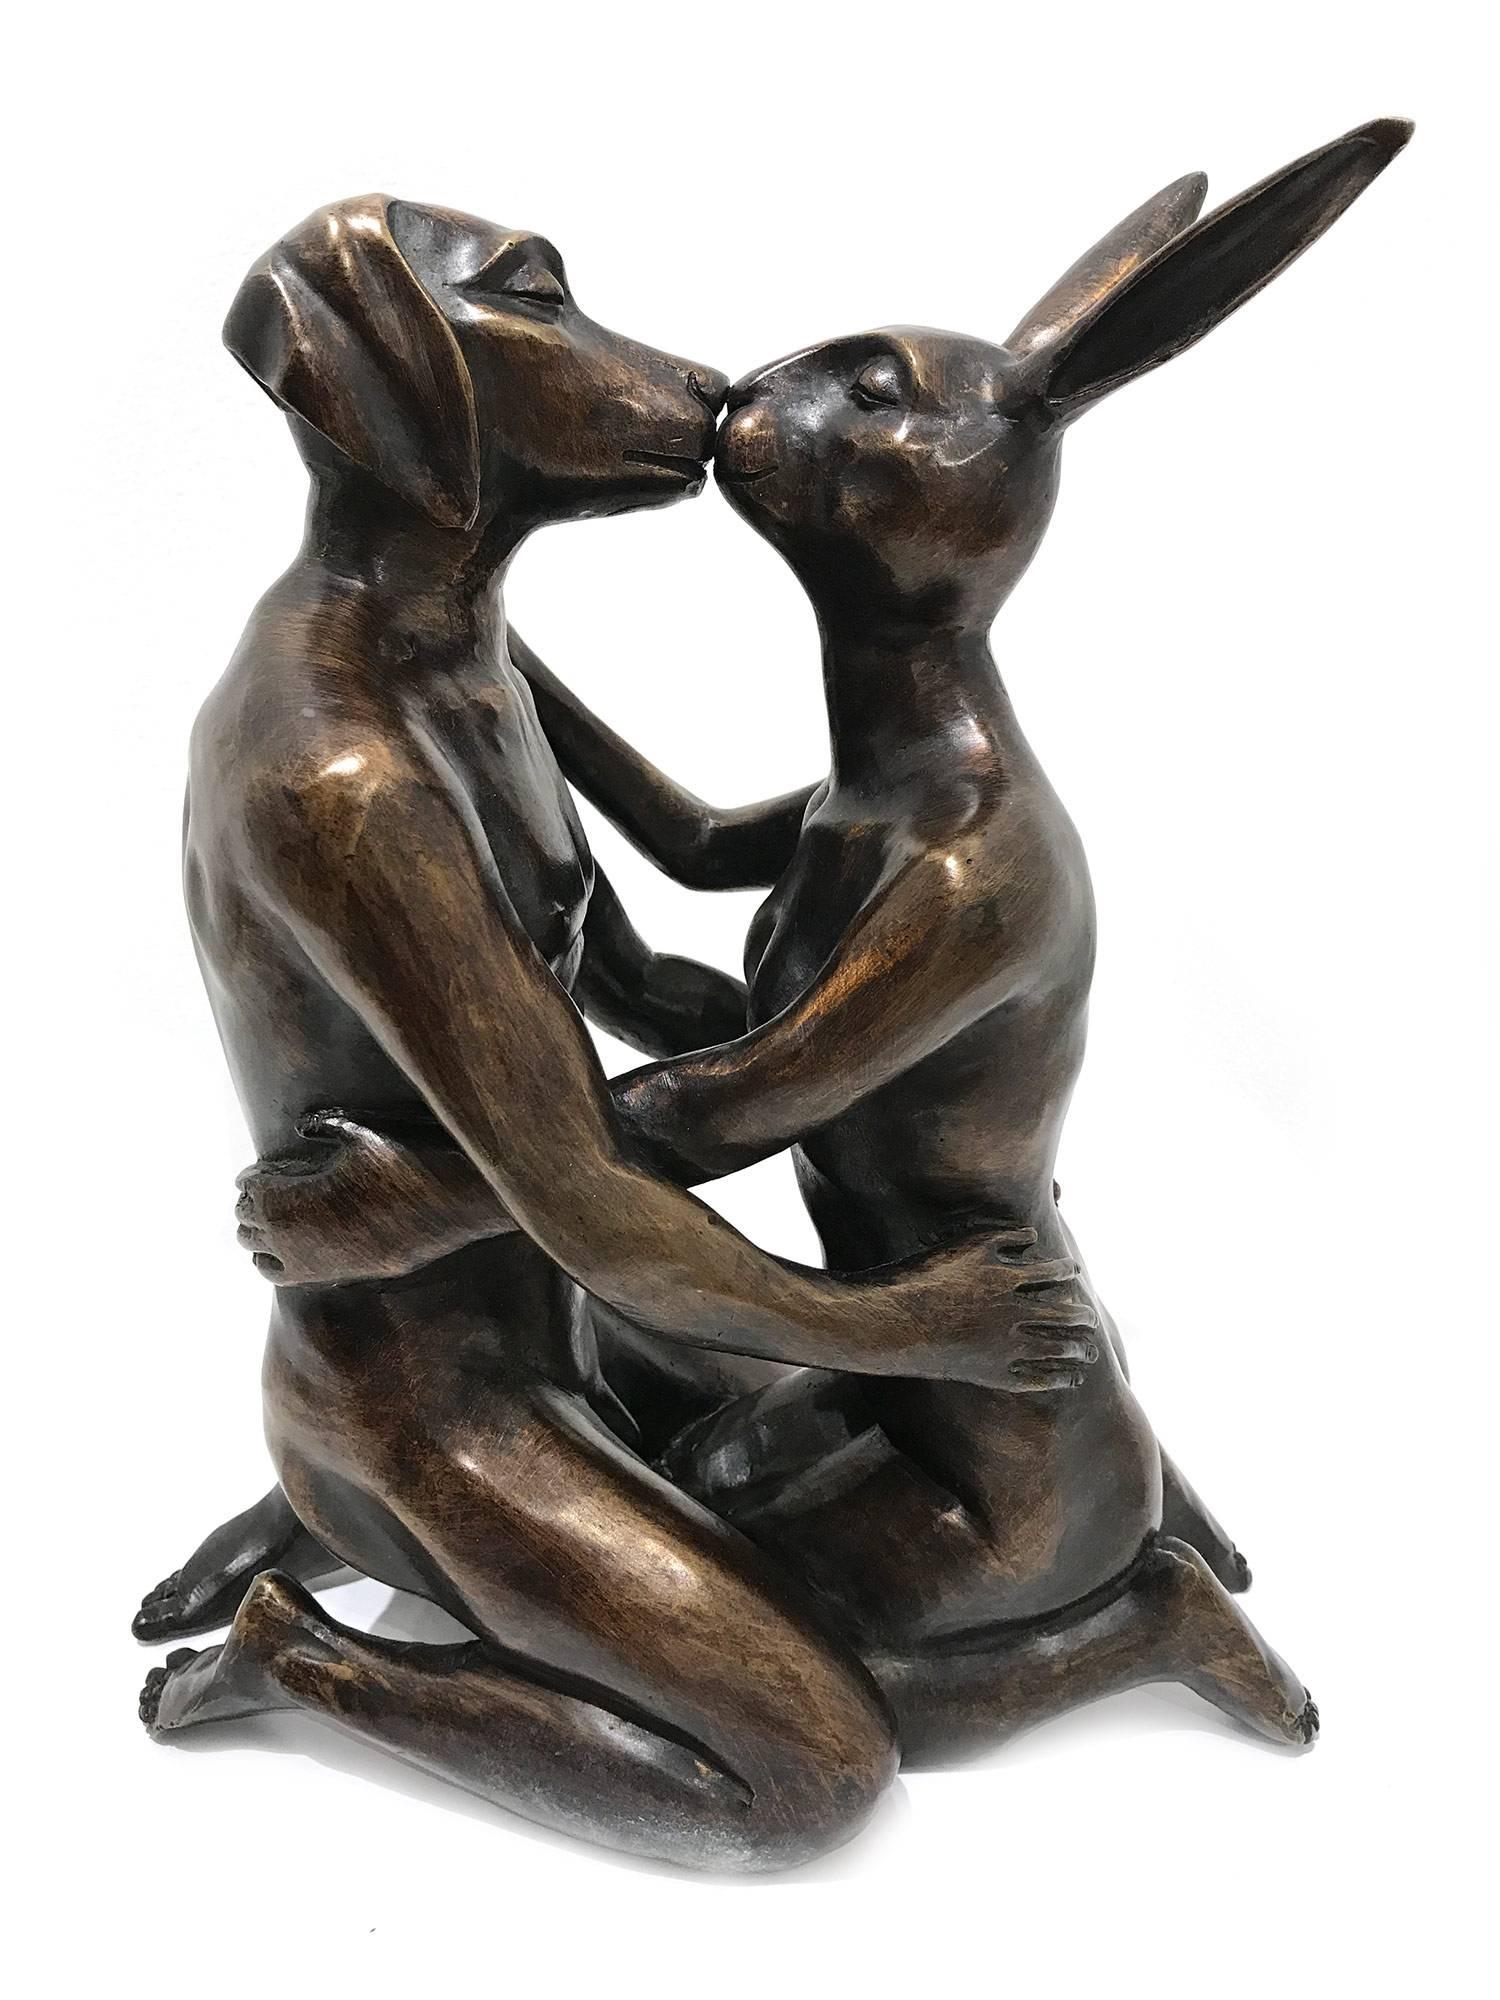 A whimsical yet very strong piece depicting the two figures from Gillie and Marc's iconic figures of the Dog/Bunny Human Hybrid (Weim and Rabbit), which has picked up much esteem across the globe. Here we find the figures embracing in a gentle kiss,